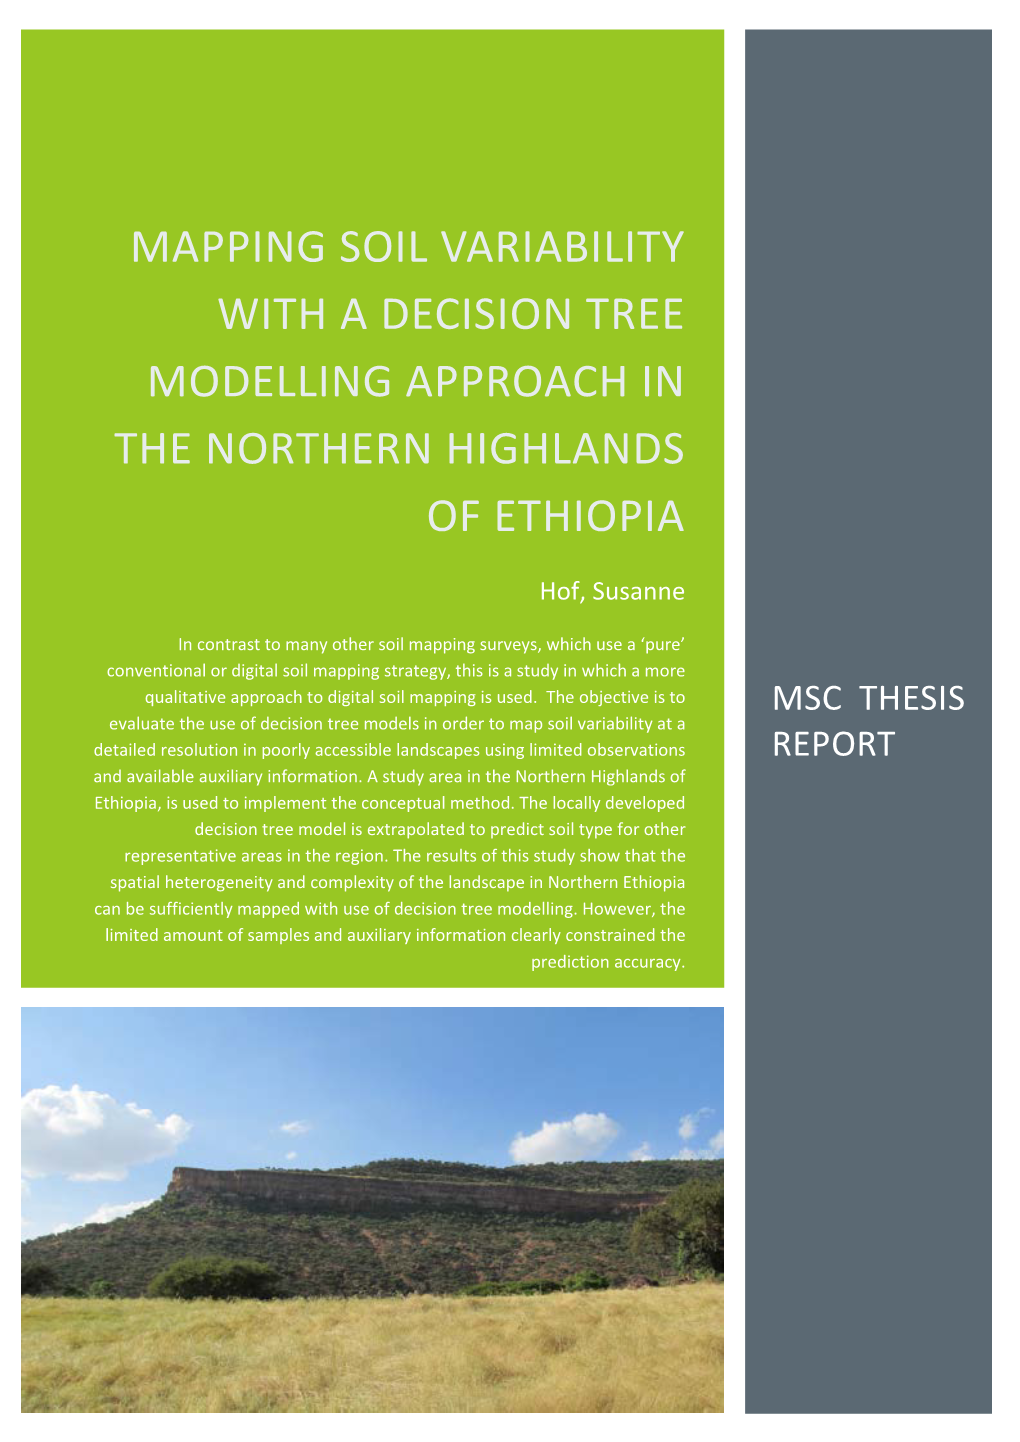 Mapping Soil Variability with a Decision Tree Modelling Approach in the Northern Highlands of Ethiopia